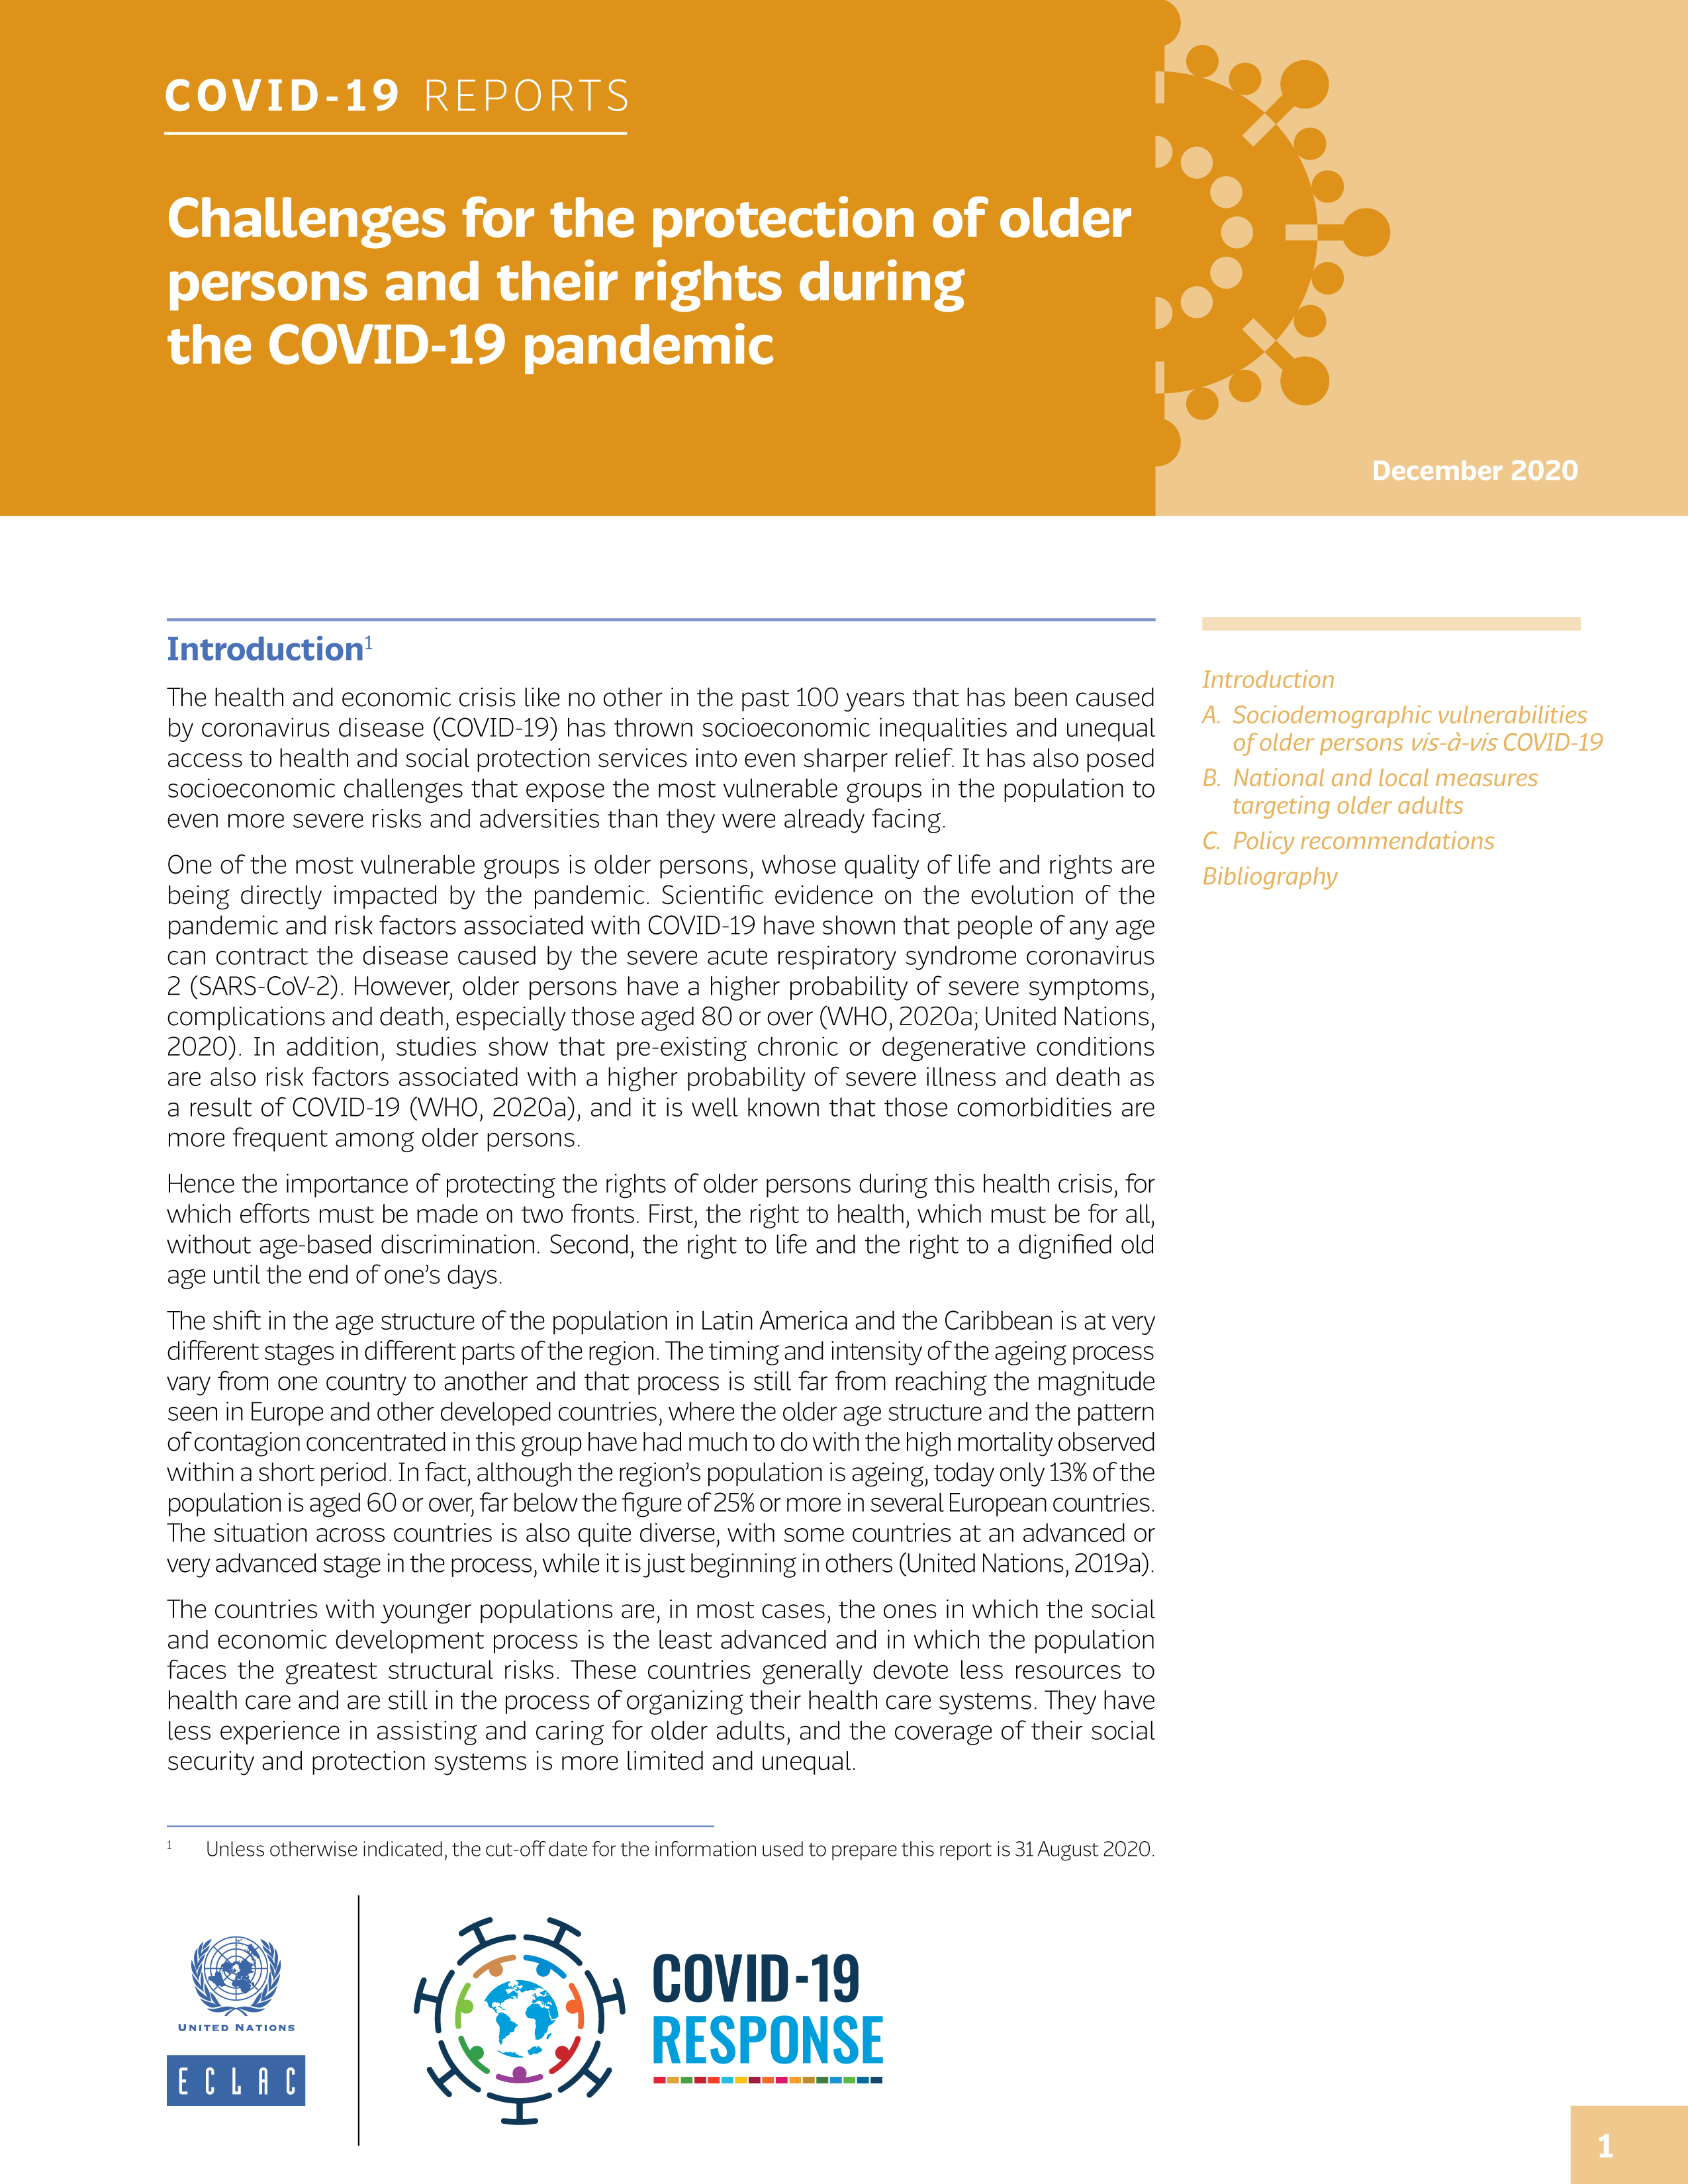 image of Challenges for the Protection of Older Persons and Their Rights During the COVID-19 Pandemic